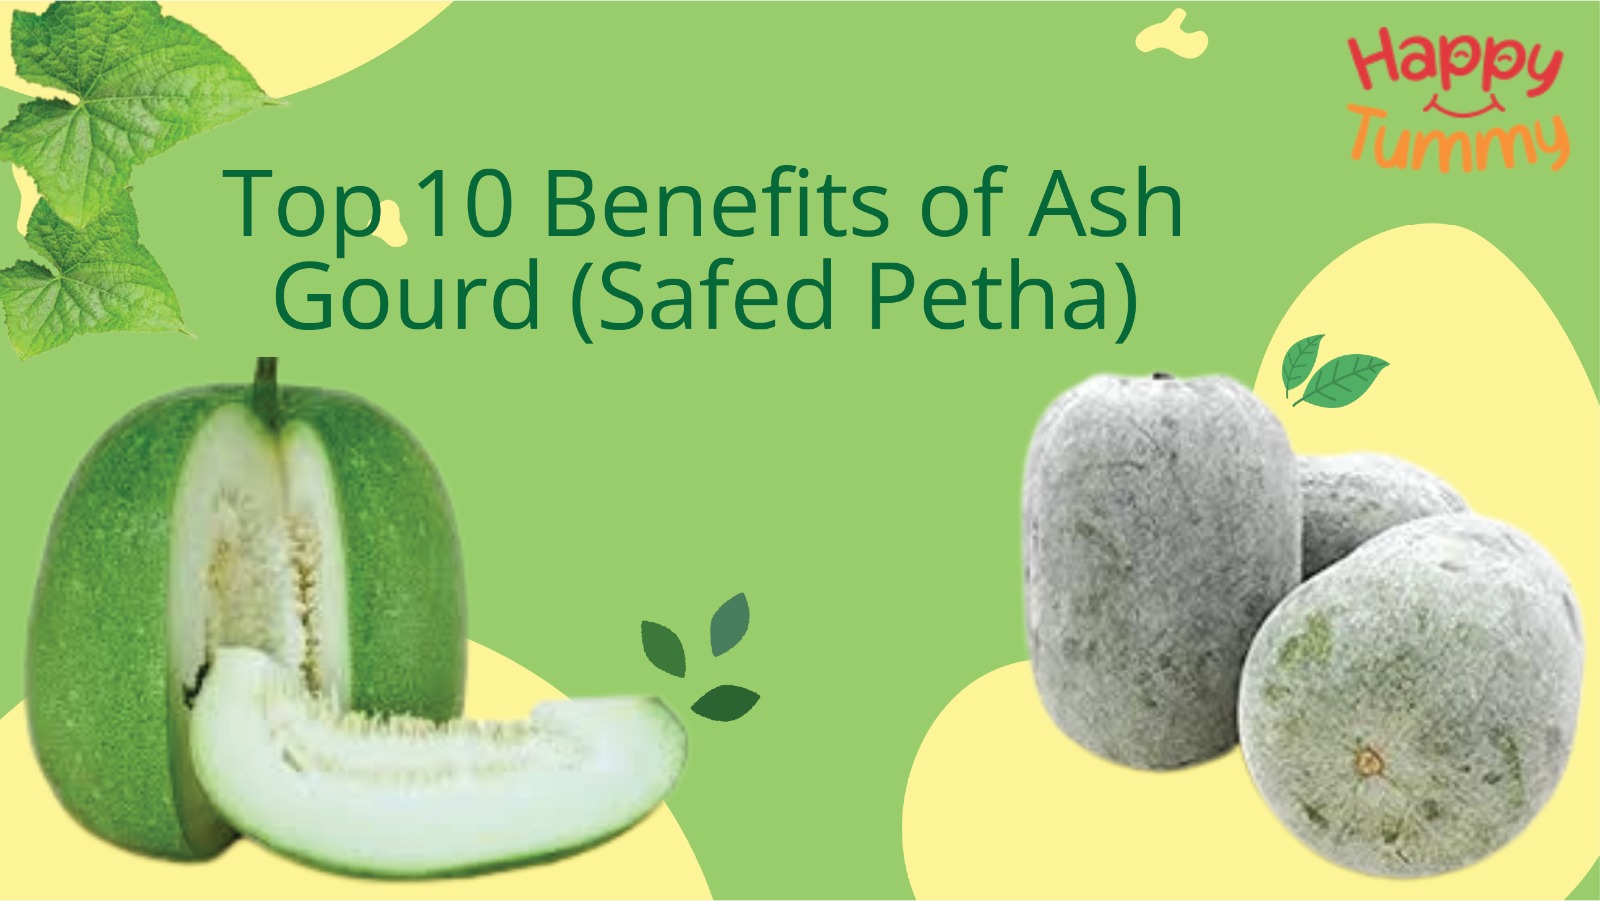 Top 10 Benefits of Ash Gourd (Safed Petha)